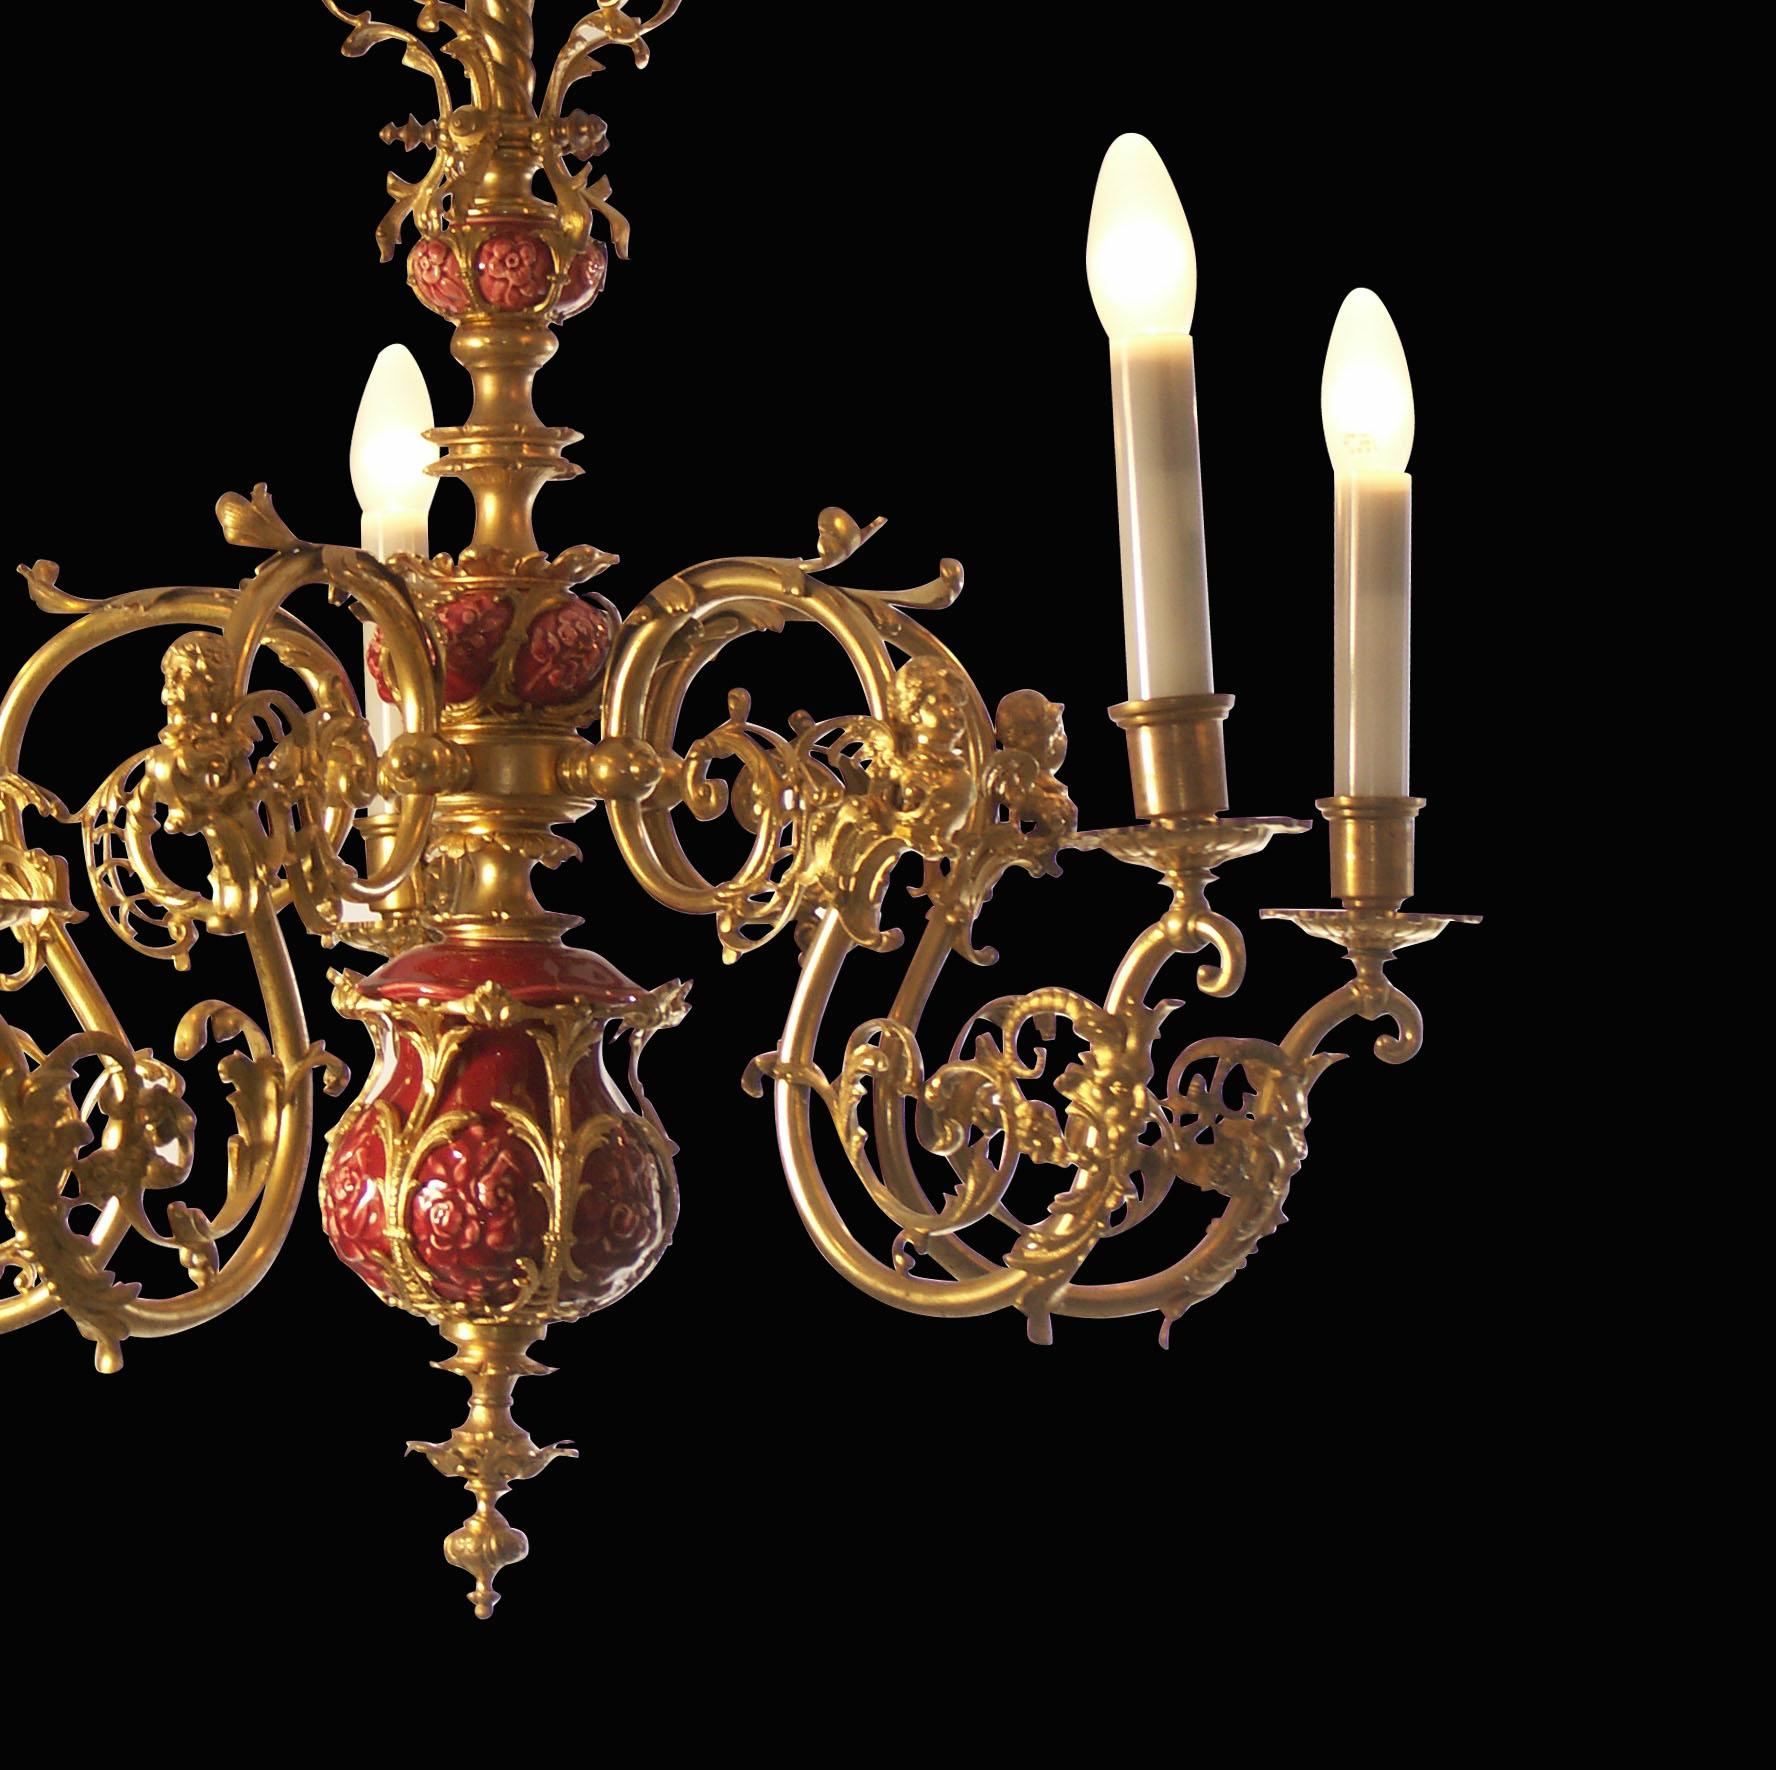 Parlor chandelier, convoluted, richly ornamented shaft with parts of ceramic, six flames
Suitable for US.